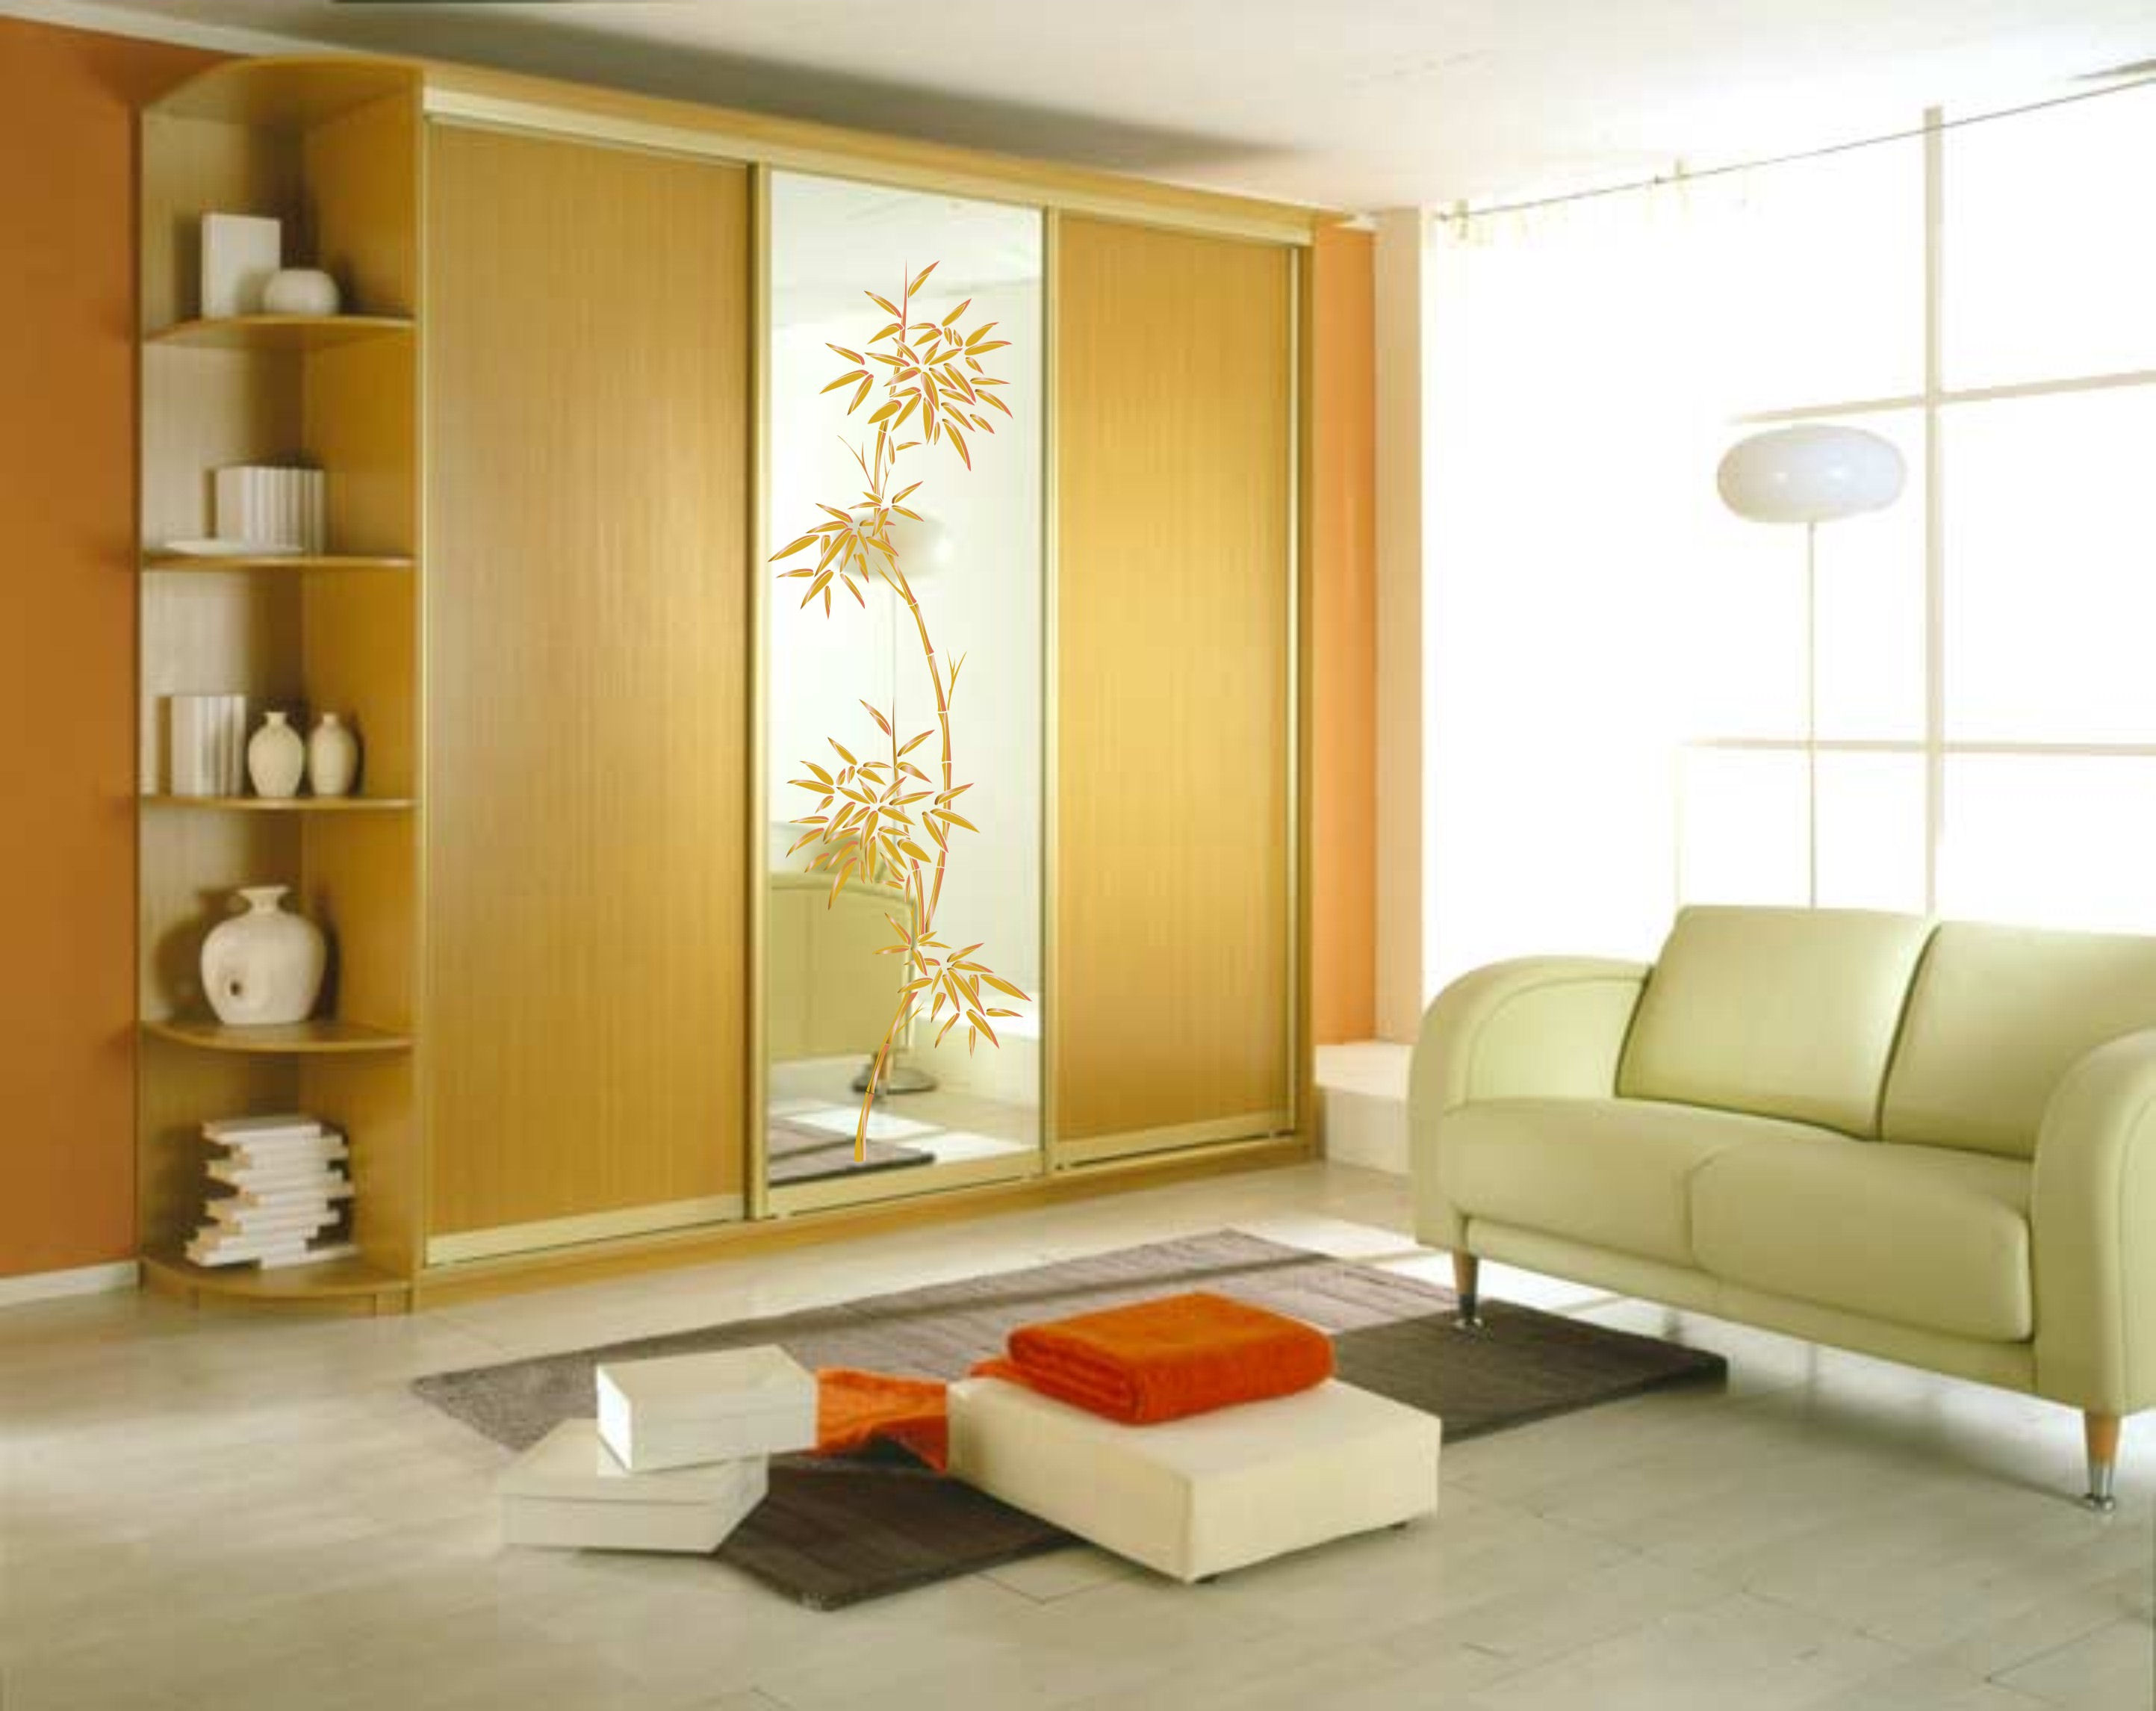 large wardrobe in the style of the corridor